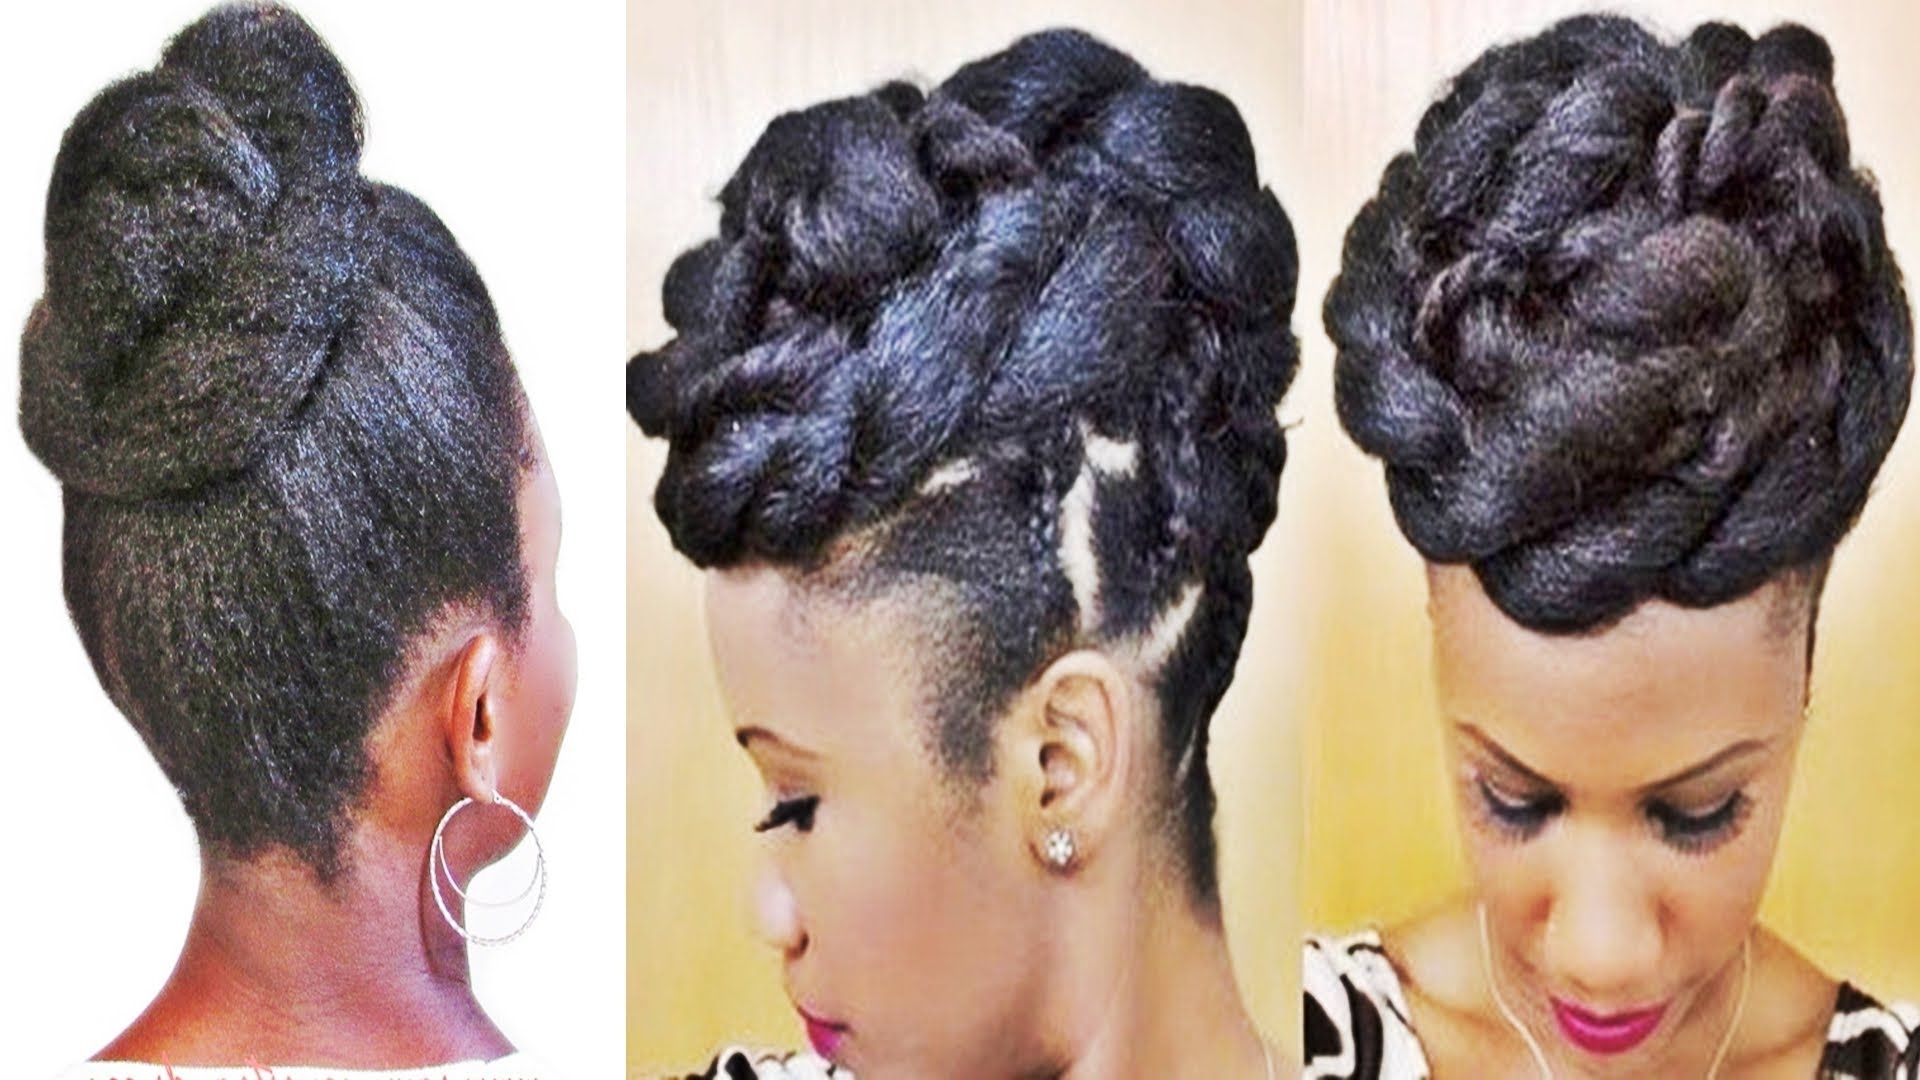 Braids And Twists Updo Hairstyle For Black Women – Youtube In Braids And Twist Updo Hairstyles (View 1 of 15)